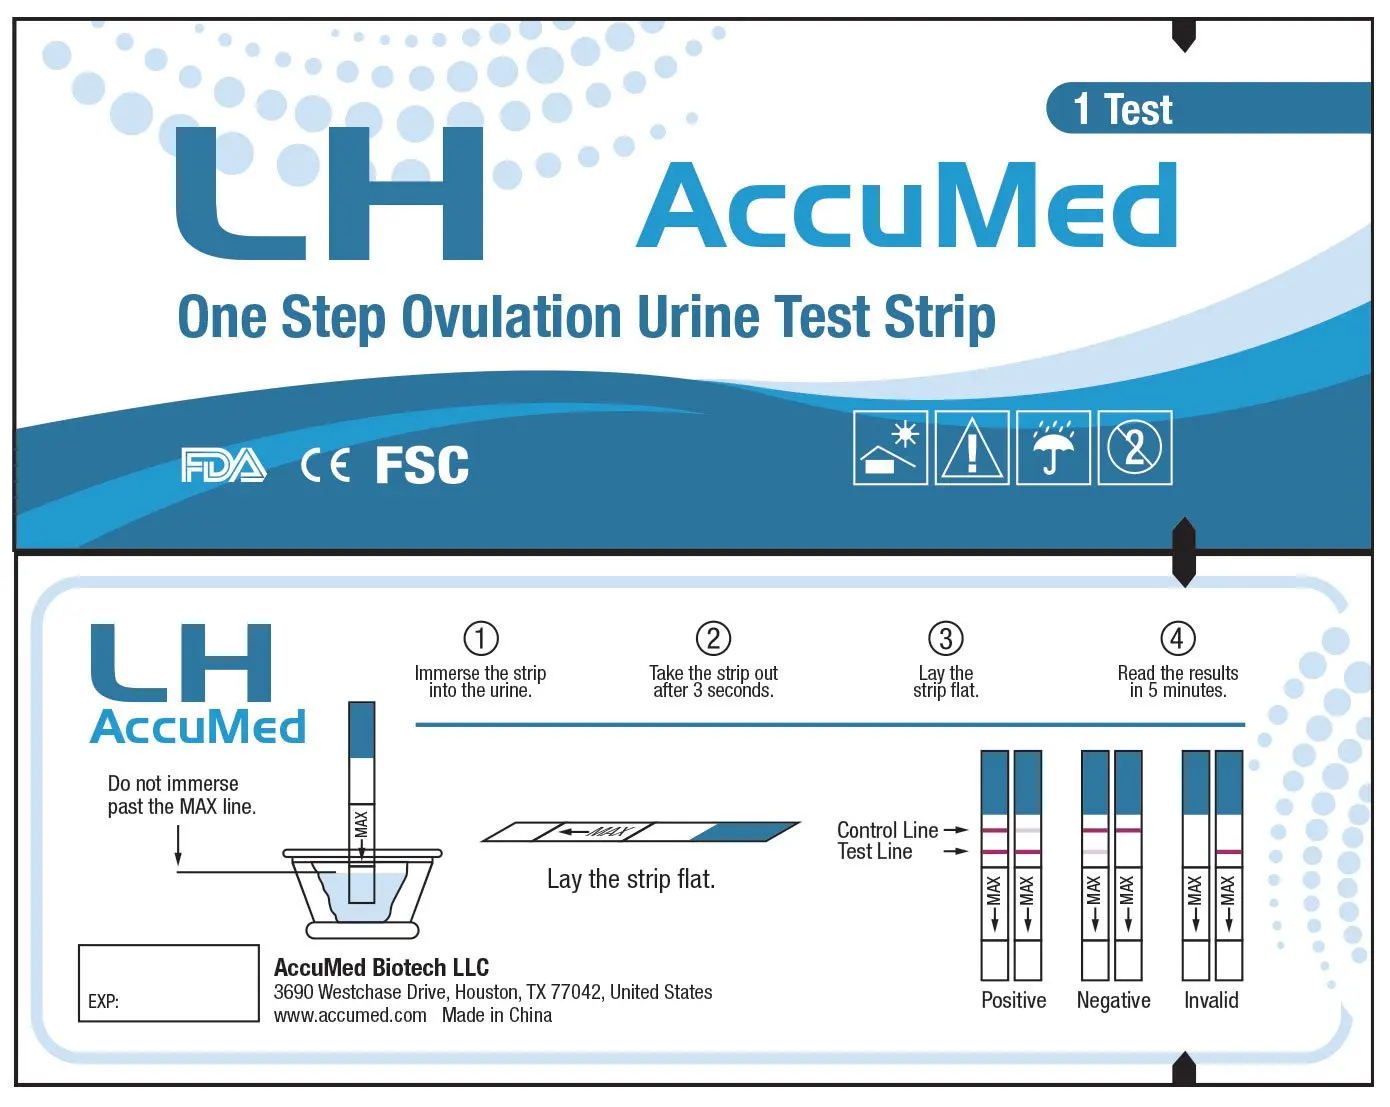 AccuMed ® Ovulation (LH) Test Strips Kit, Clear and Accurate Results, FDA A...